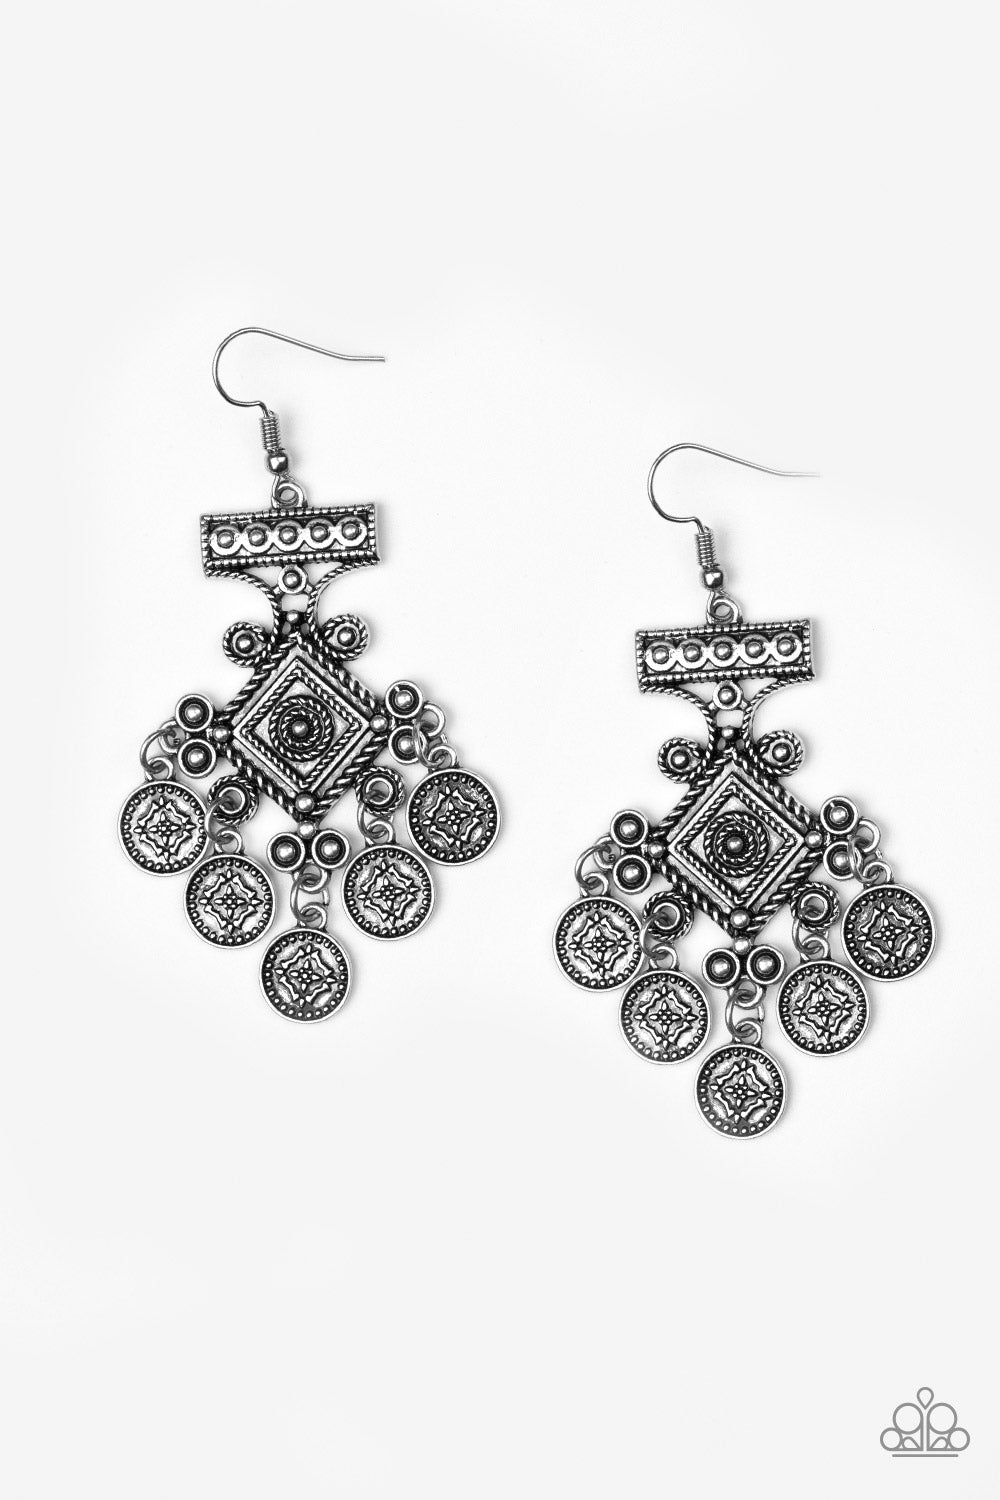 UNEXPLORED LANDS - SILVER COINS CHIME EARRINGS